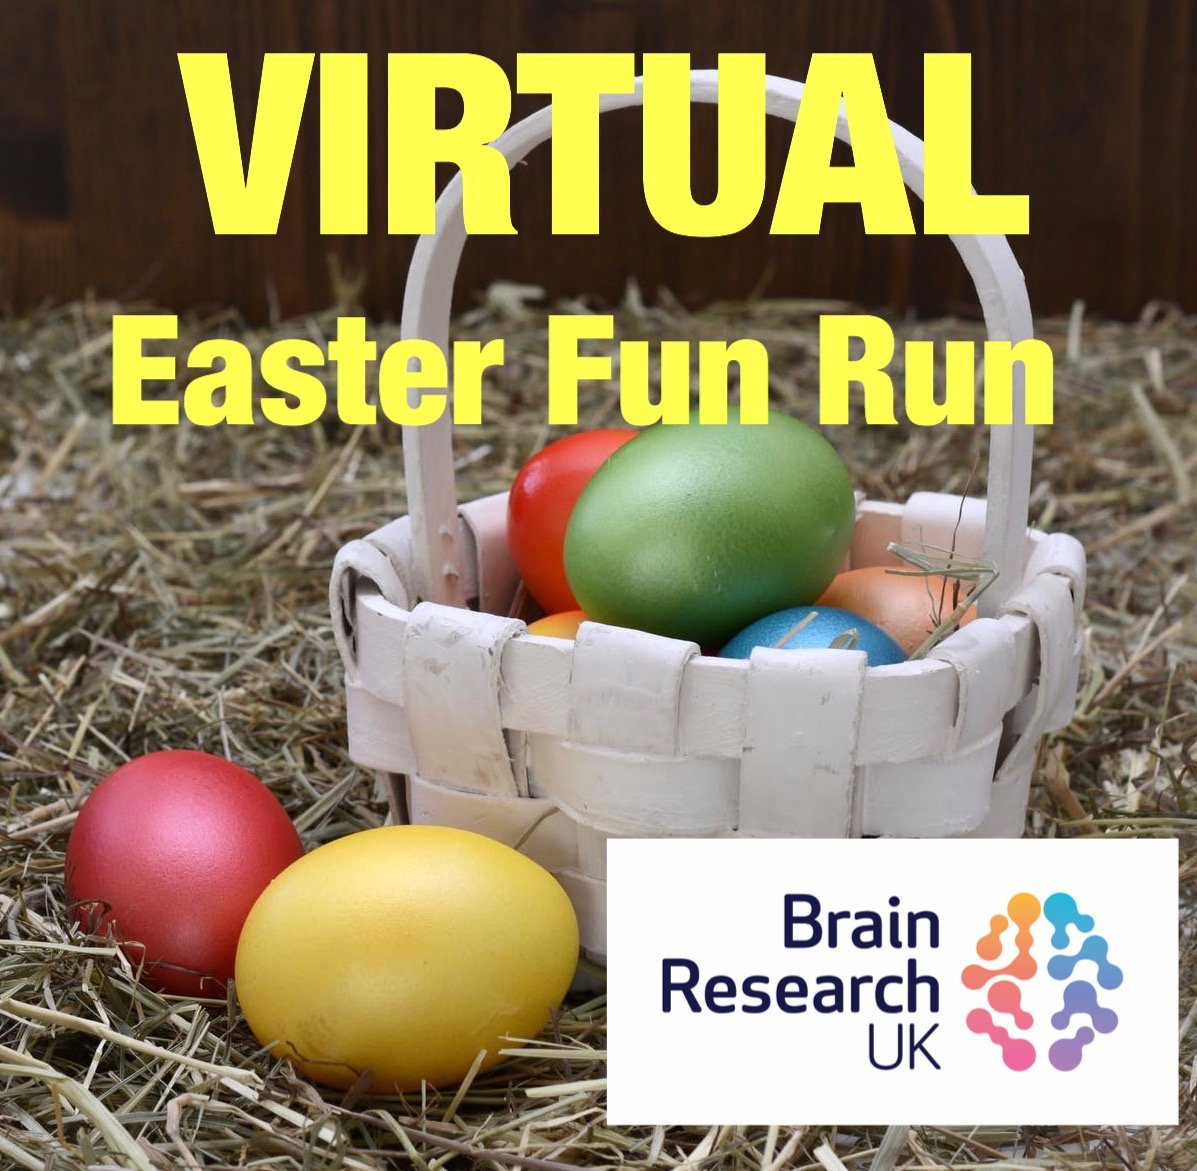 A new Easter Virtual Run.  Choose from different distances & go! Contact VirtualEasterFunRun@gmail.com for info. Proceeds raised to Brain Research UK.